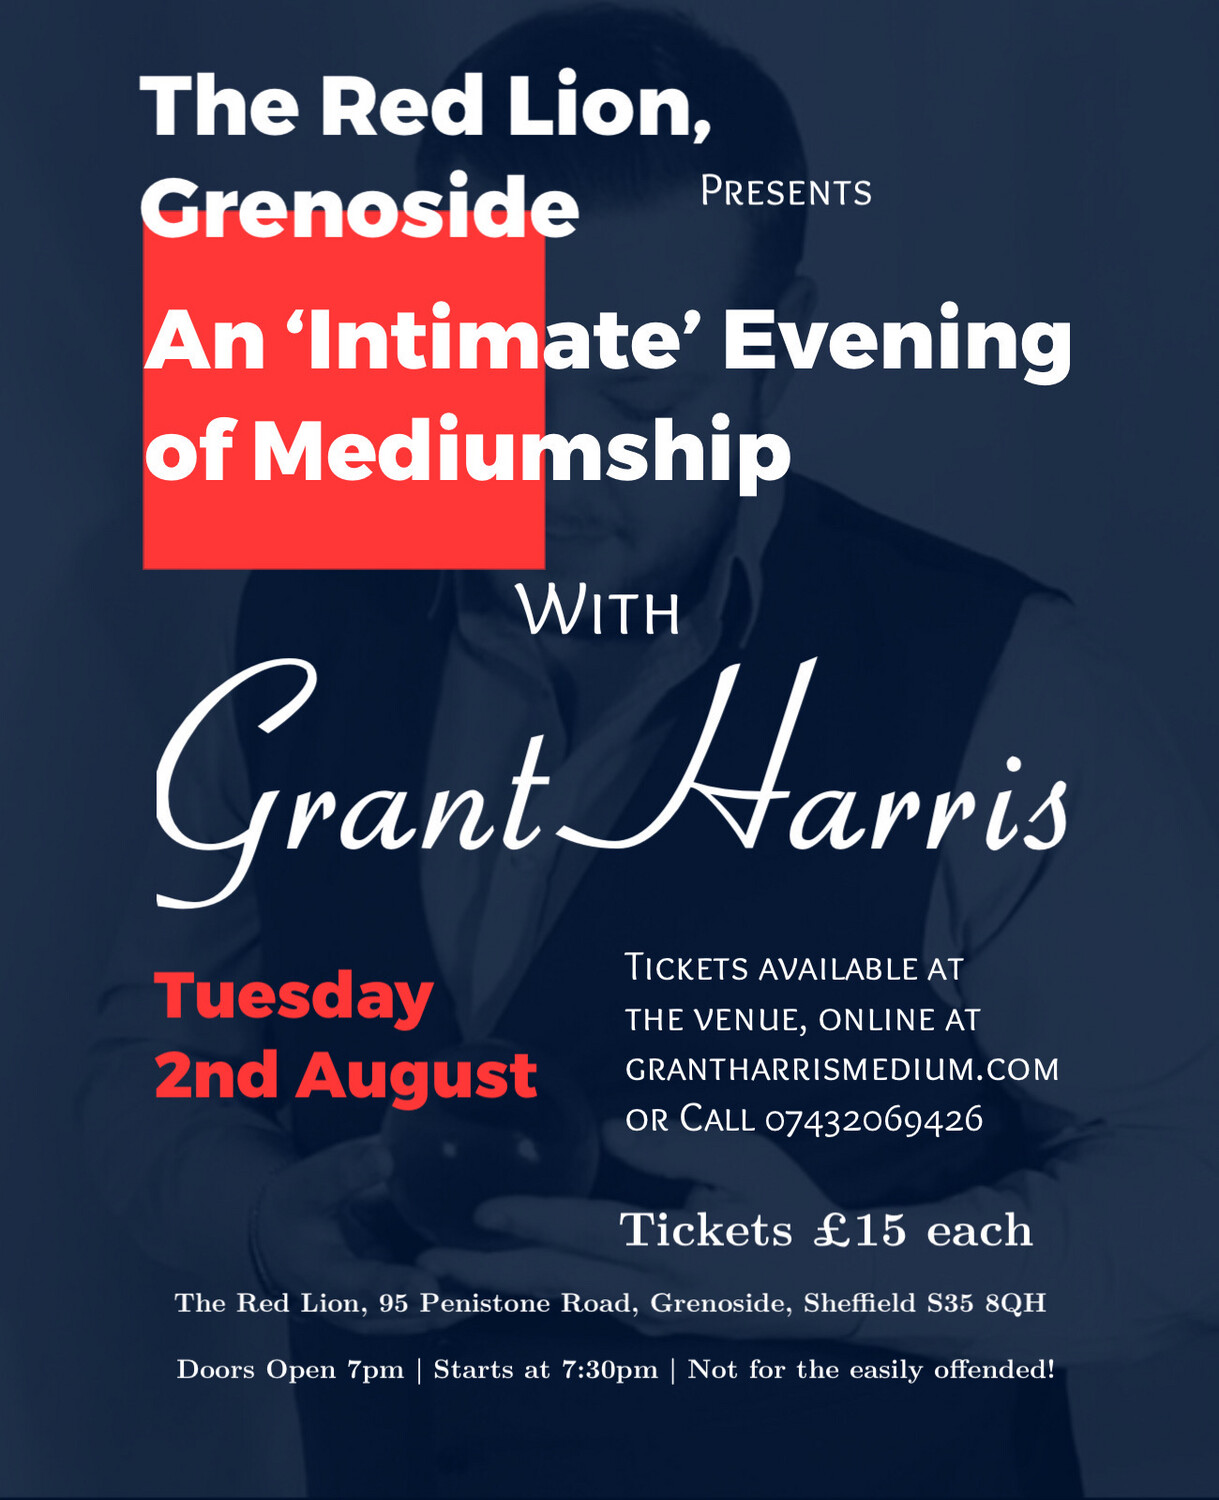 An ‘Intimate’ Evening of Mediumship, The Red Lion, Genonisde Sheffield, Tues 2nd August 2022